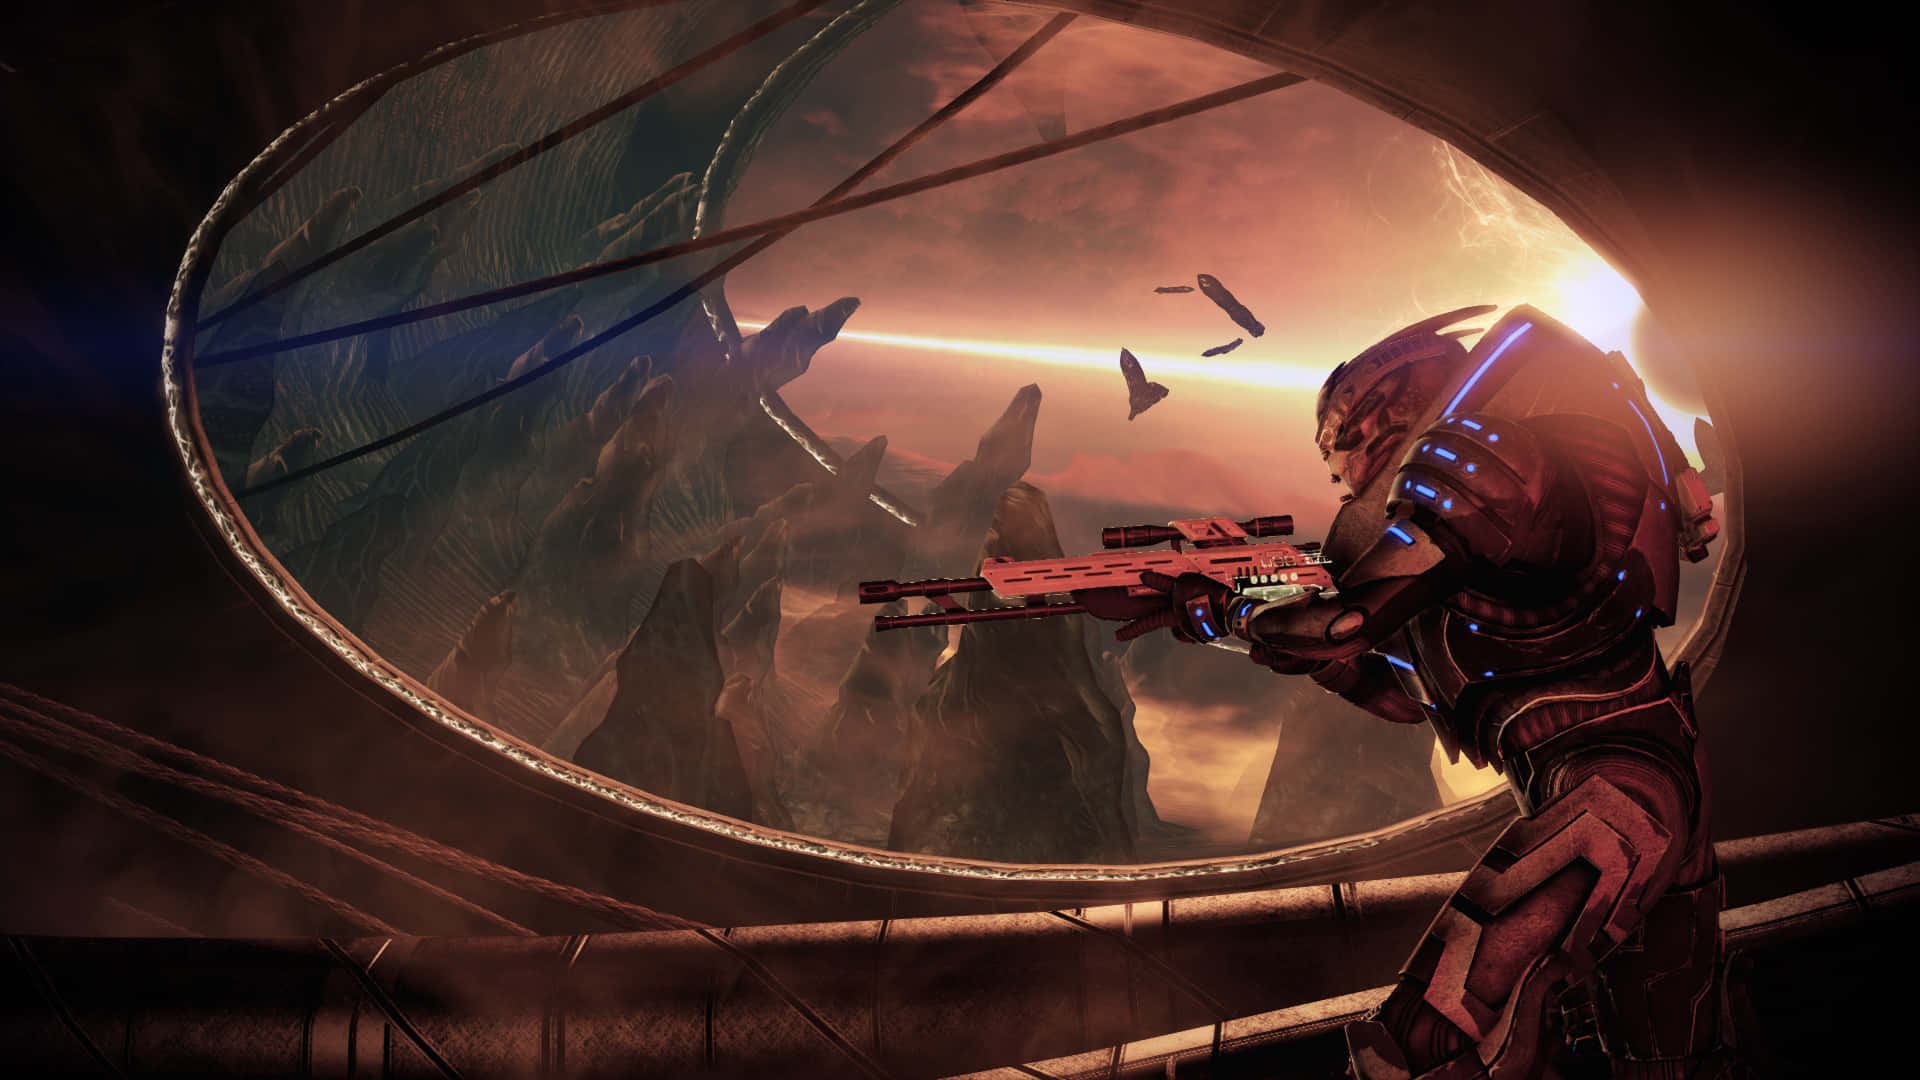 Commander Shepard and crew in action in Mass Effect Legendary Edition Wallpaper